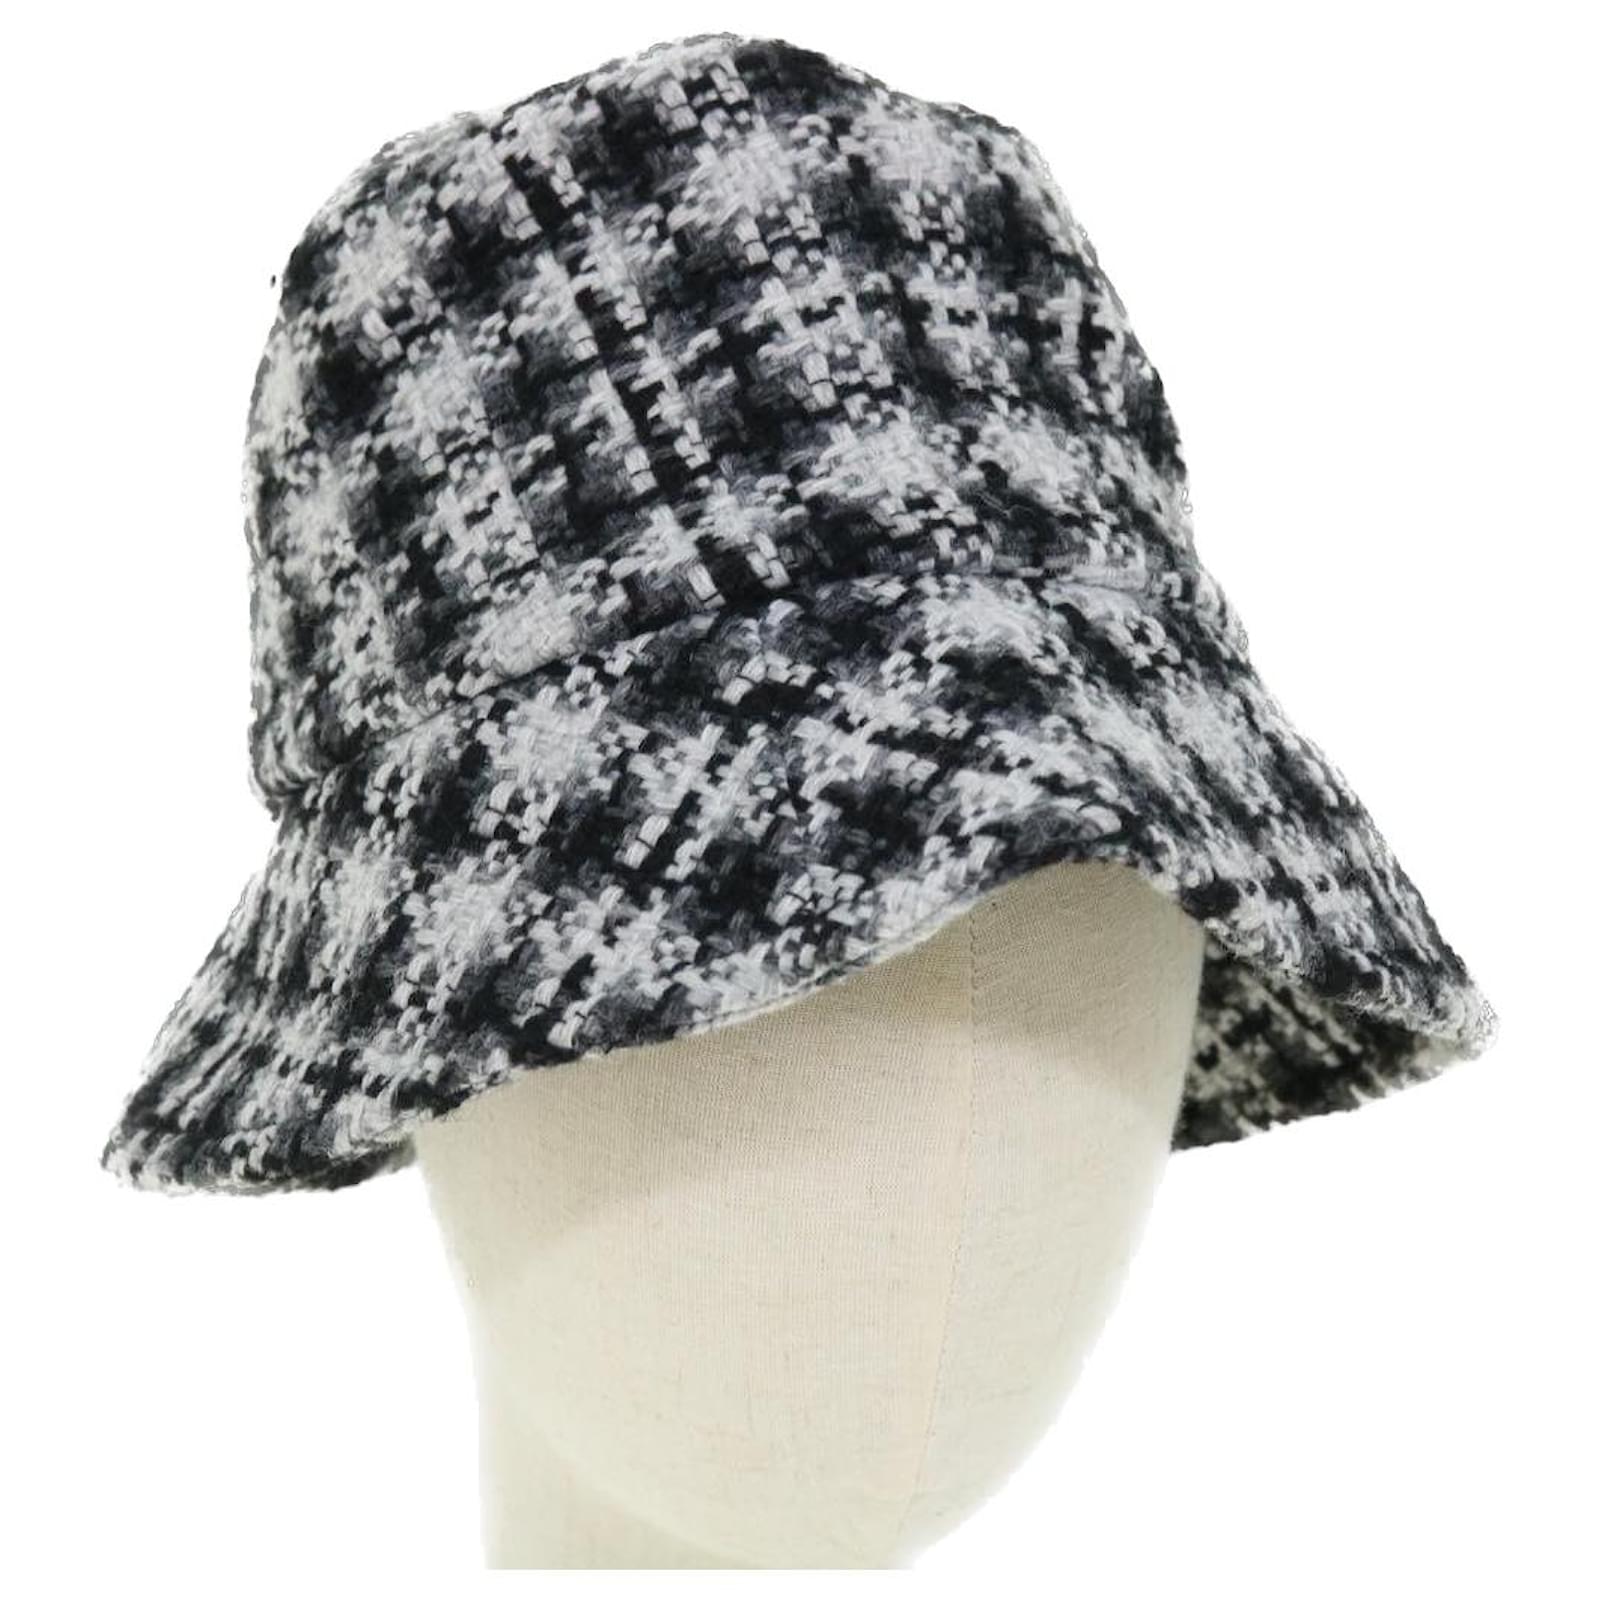 Hats Chanel Chanel Coco Mark Hat Wool S White Black CC Auth am4943